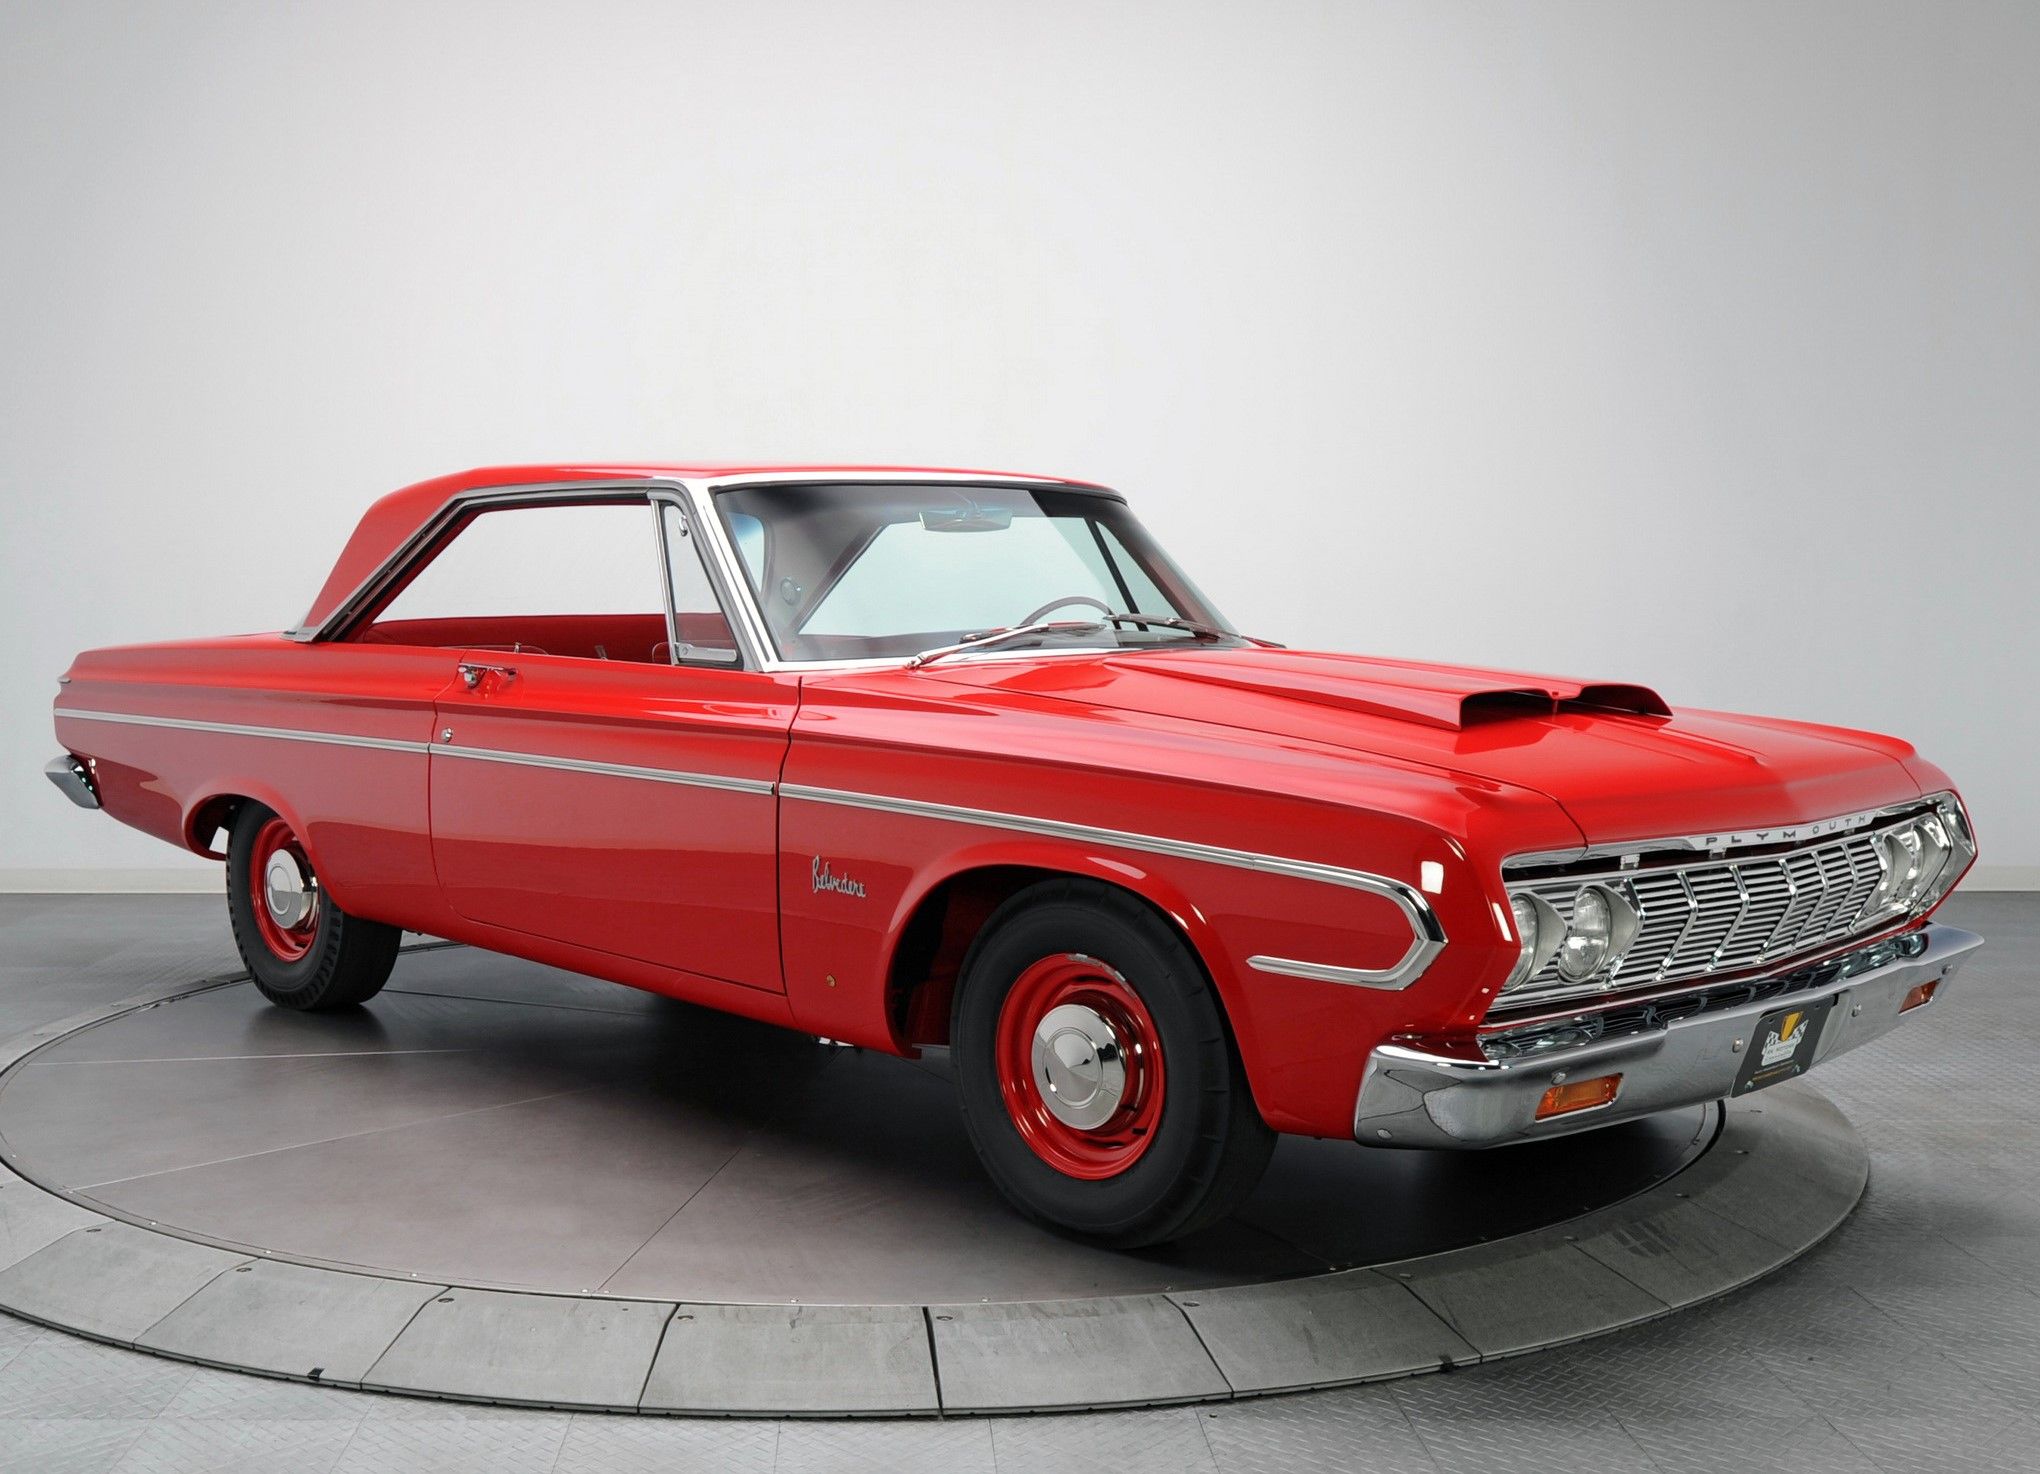 The 1964 Plymouth Belvedere on display. 